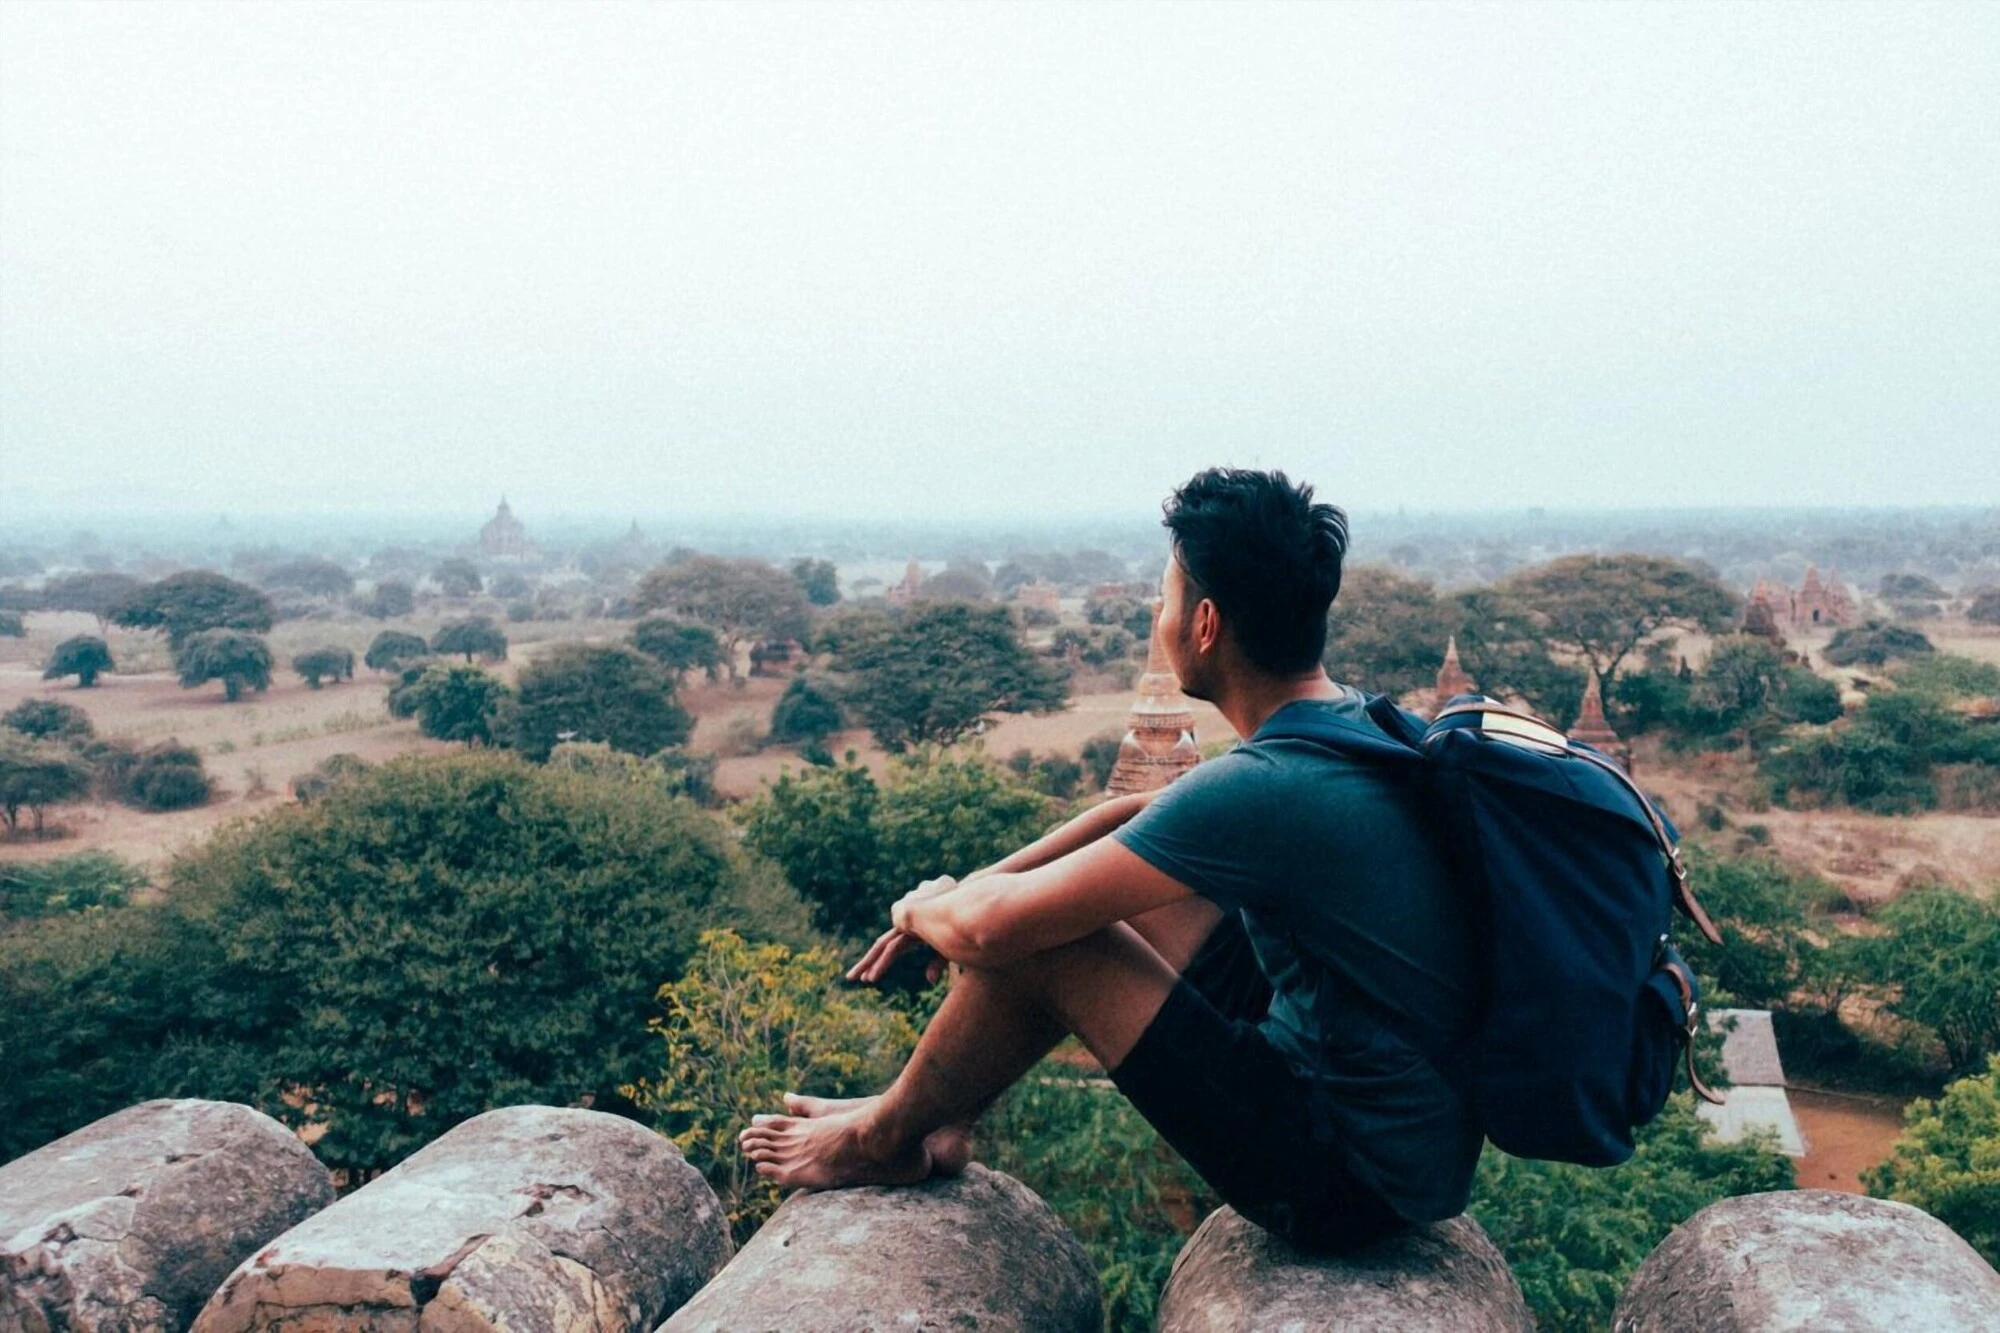 How to enjoy yourself and have fun while traveling alone